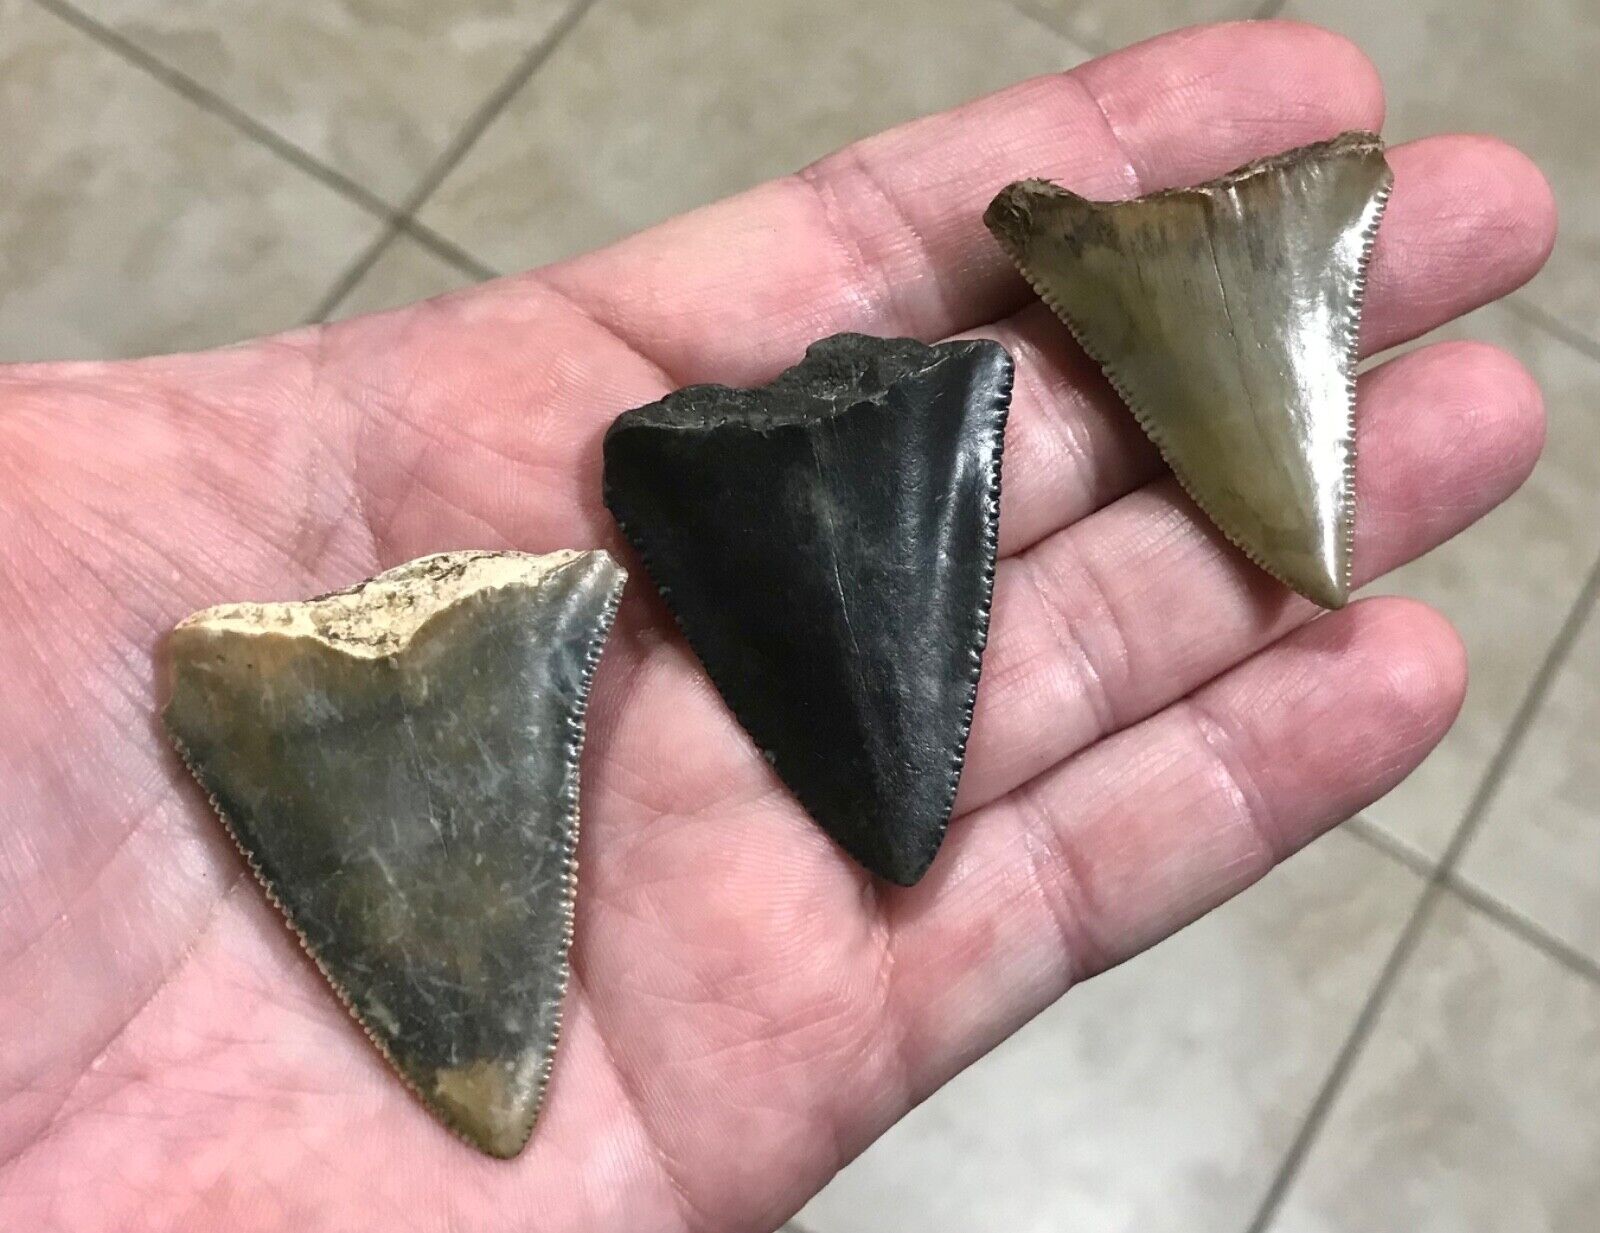 GORGEOUSLY GRAND - S.W.FLORIDA LAND FINDS - GREAT WHITE Shark Teeth Fossils